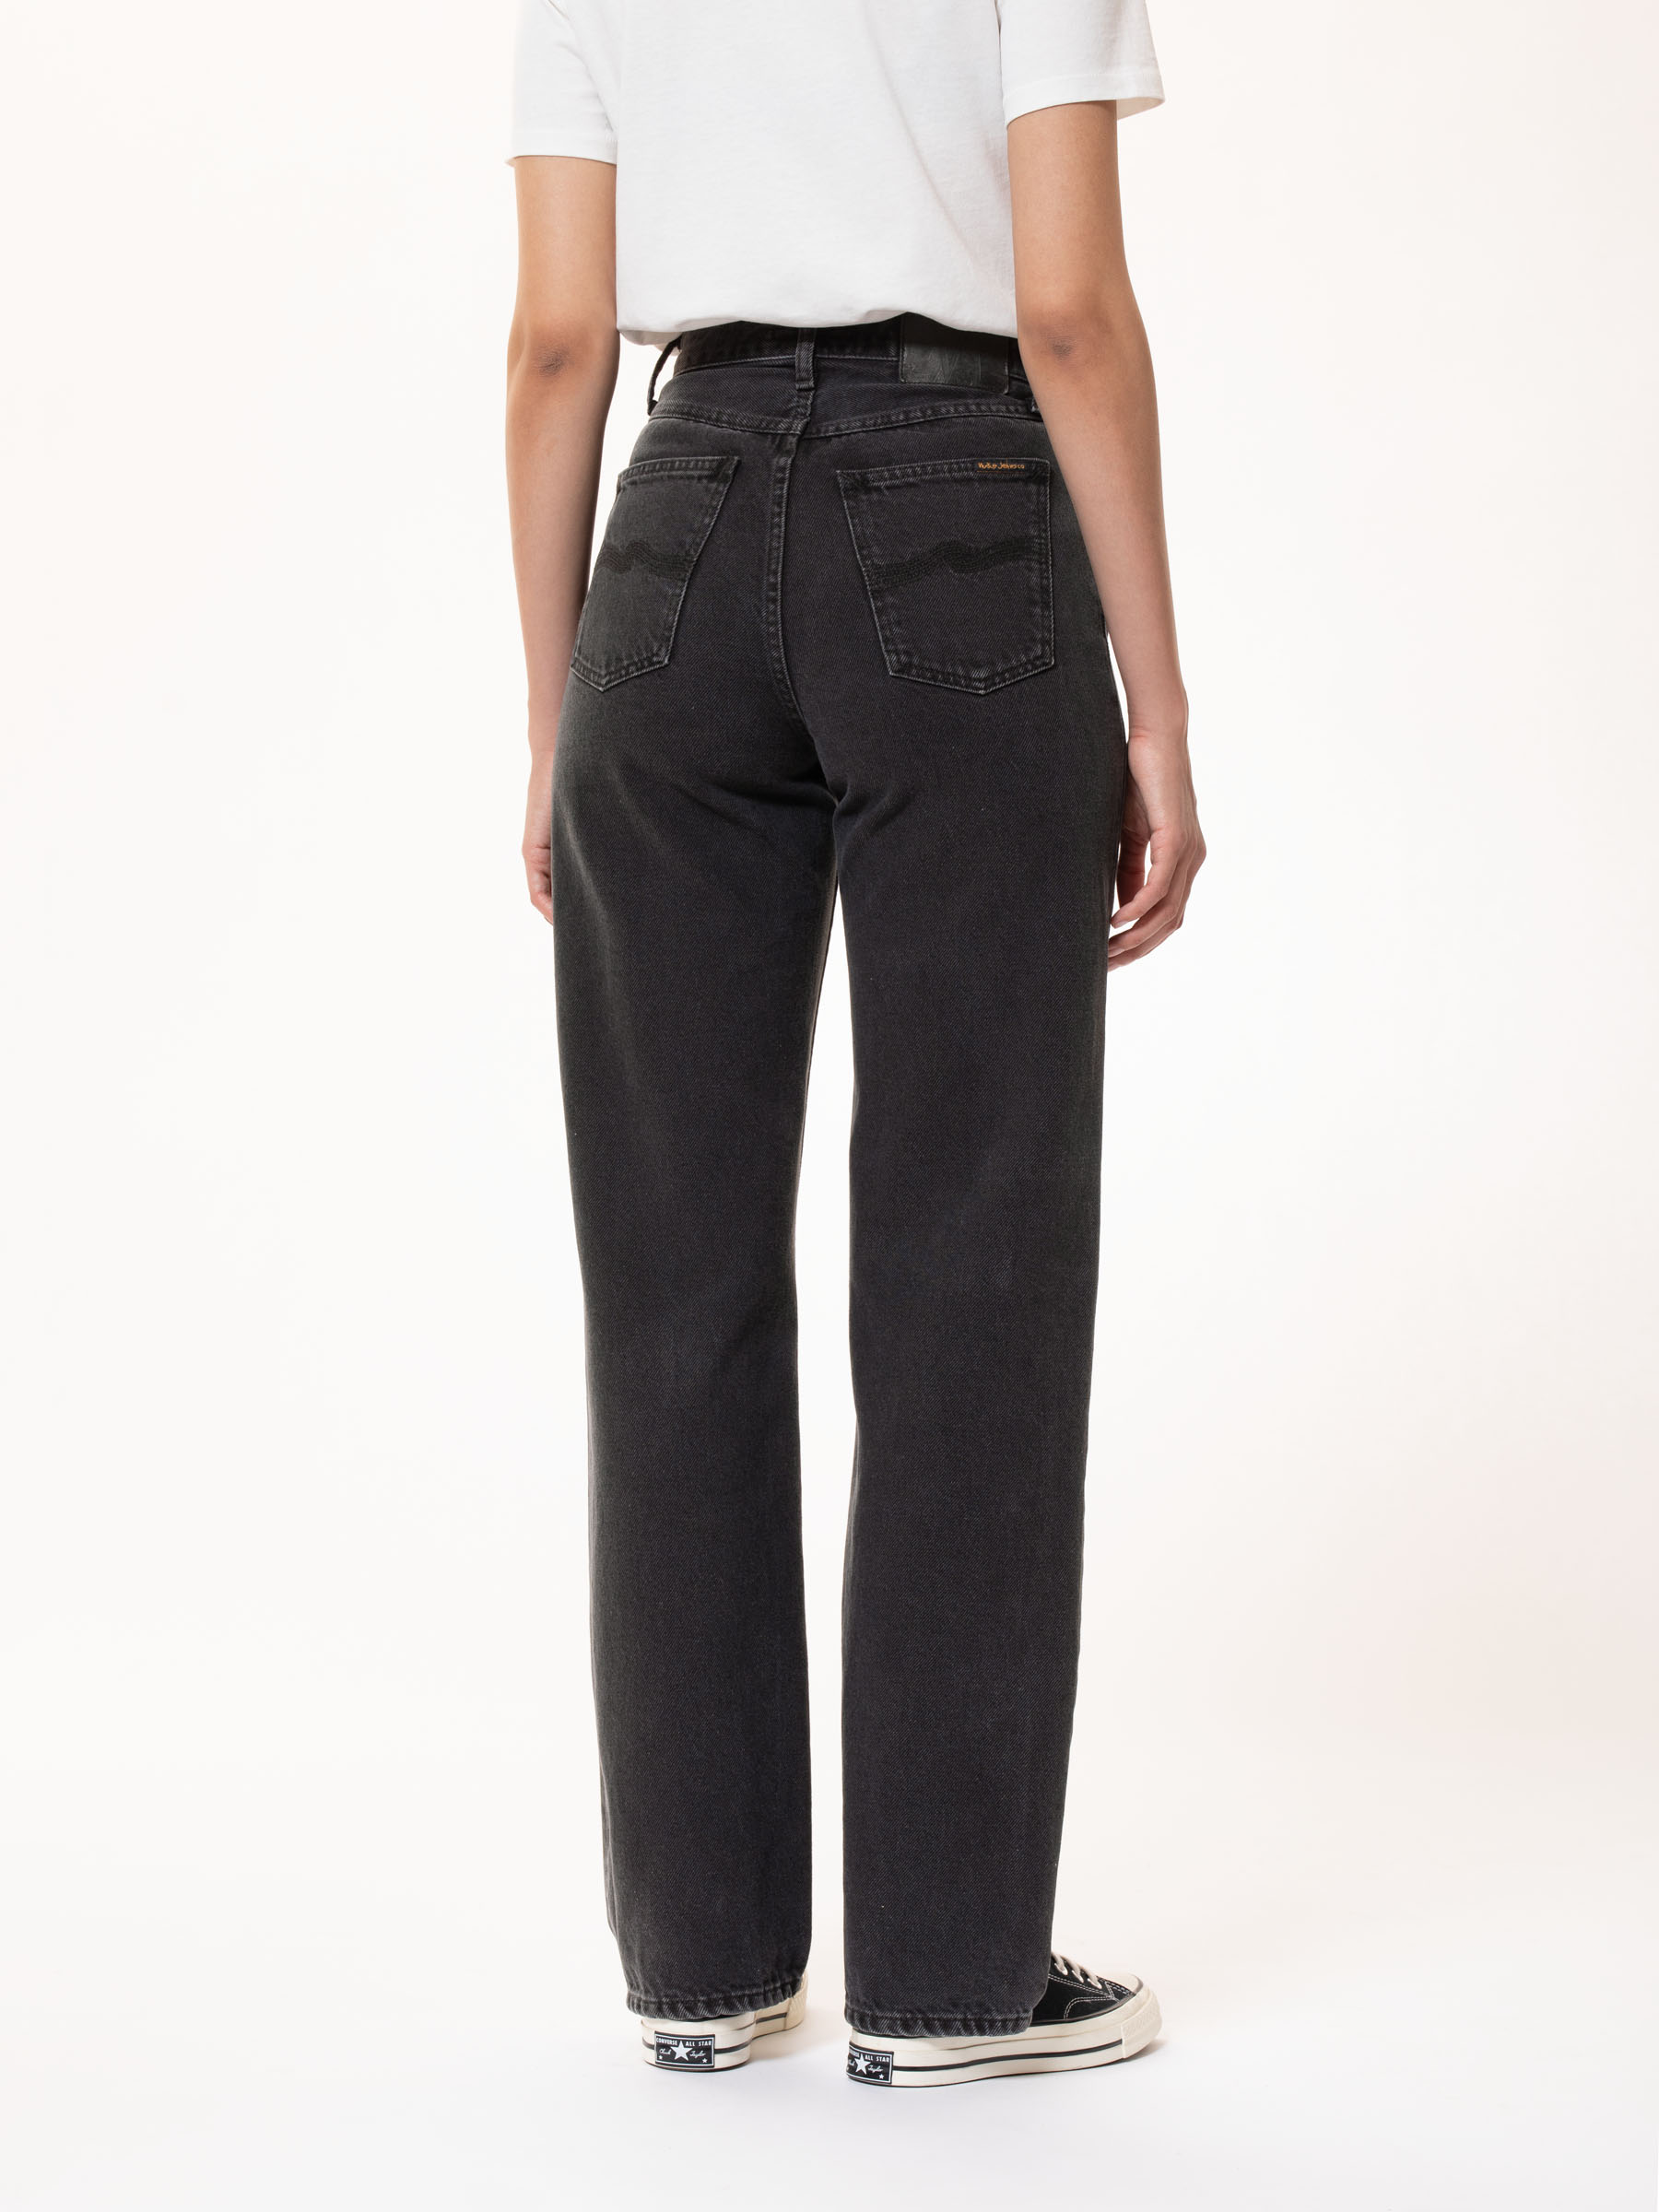 Nudie Jeans - CLEAN EILEEN -  Washed Out Black